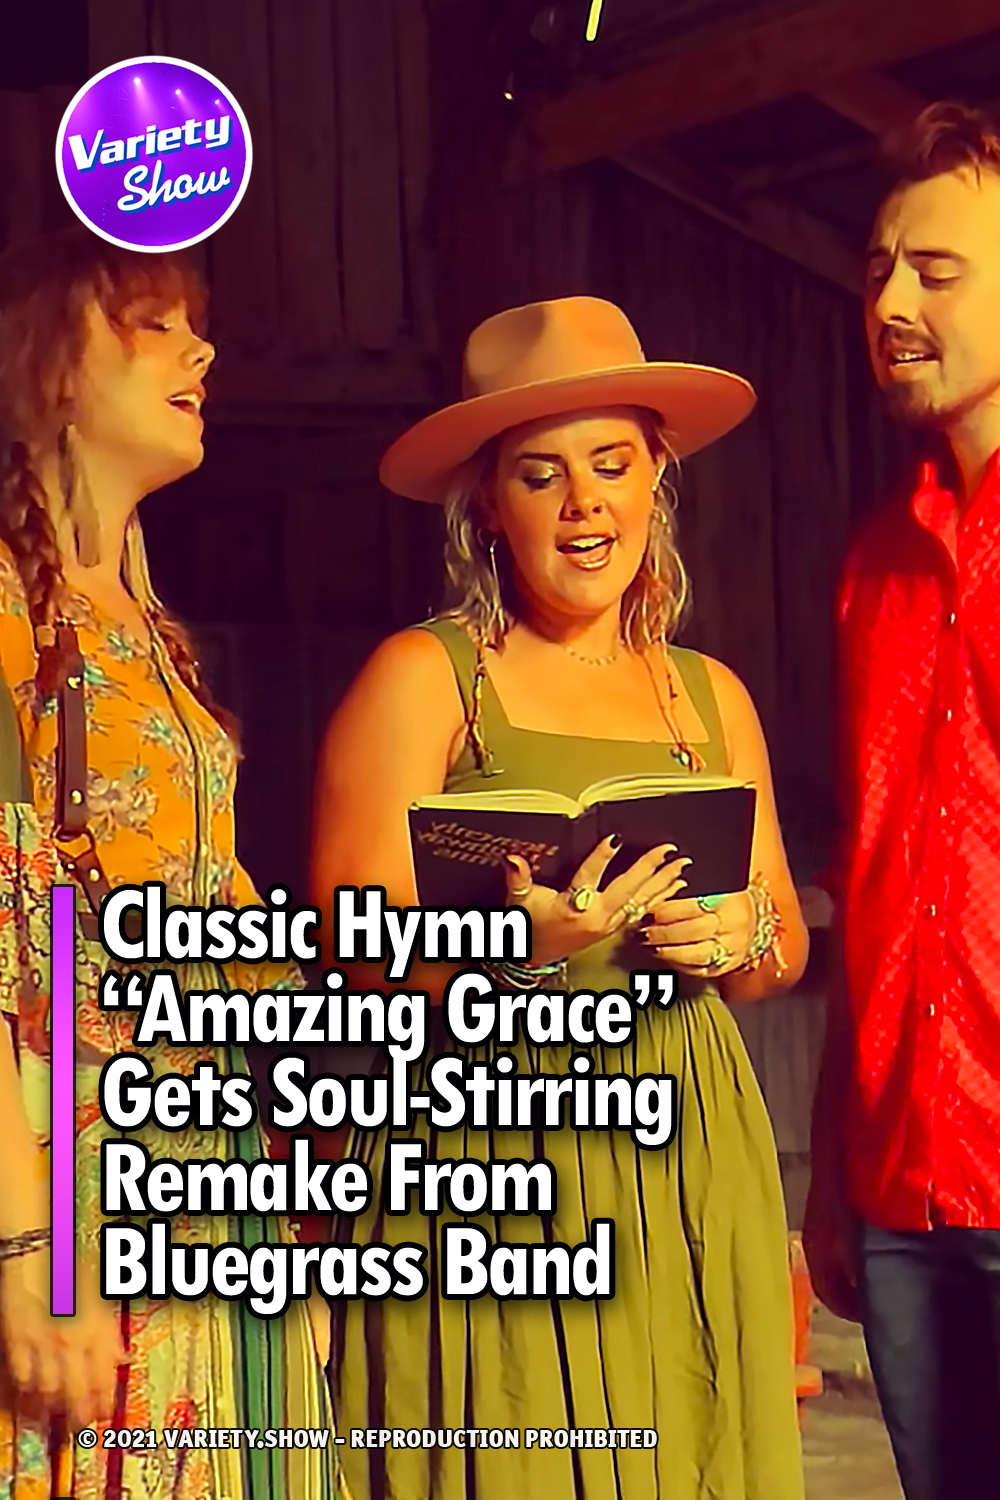 Classic Hymn “Amazing Grace” Gets Soul-Stirring Remake From Bluegrass Band